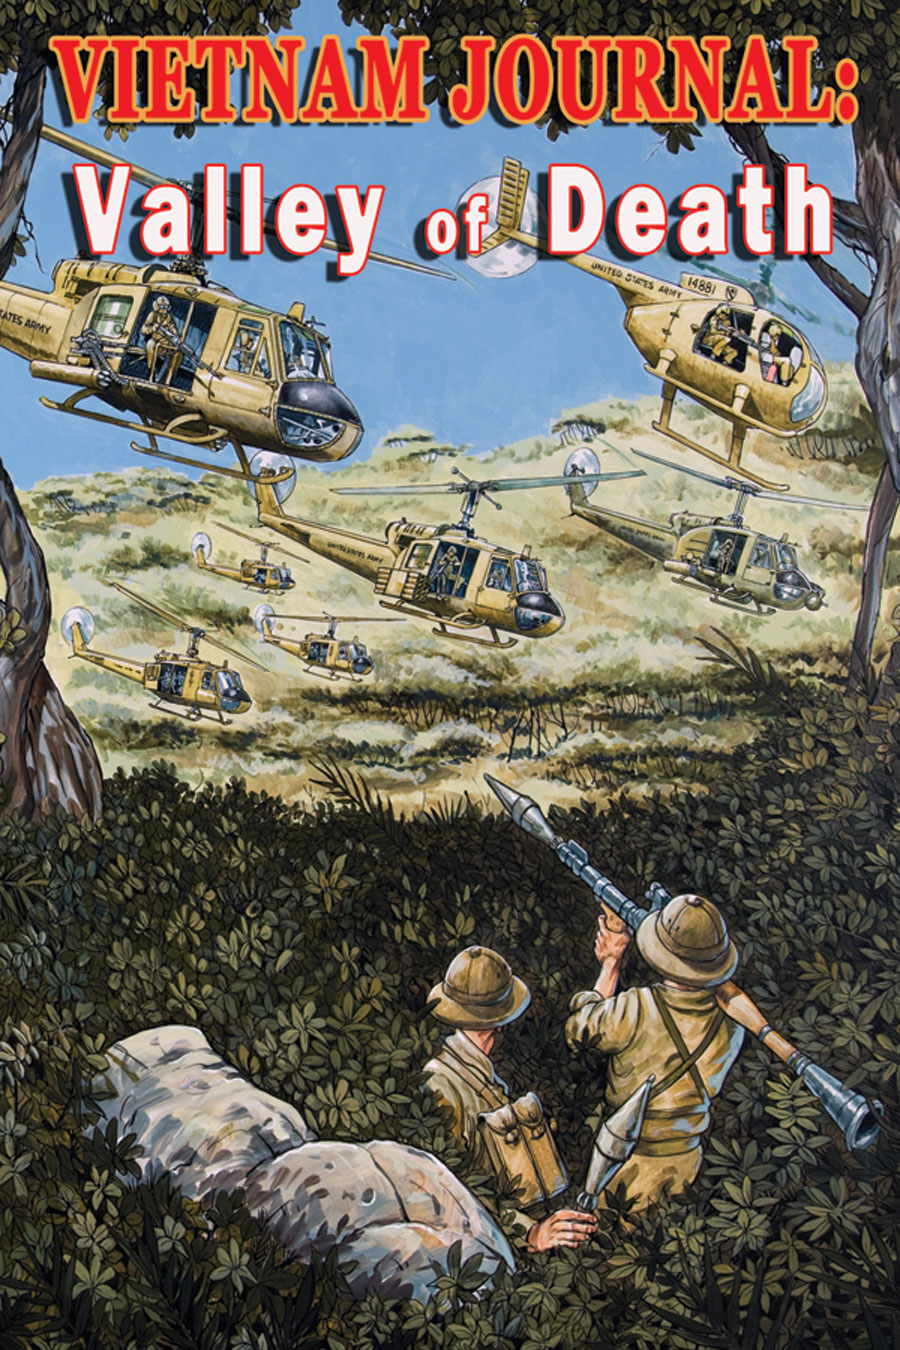 Valley of Death VIETNAM JOURNAL CONTINUUM By: Don Lomax